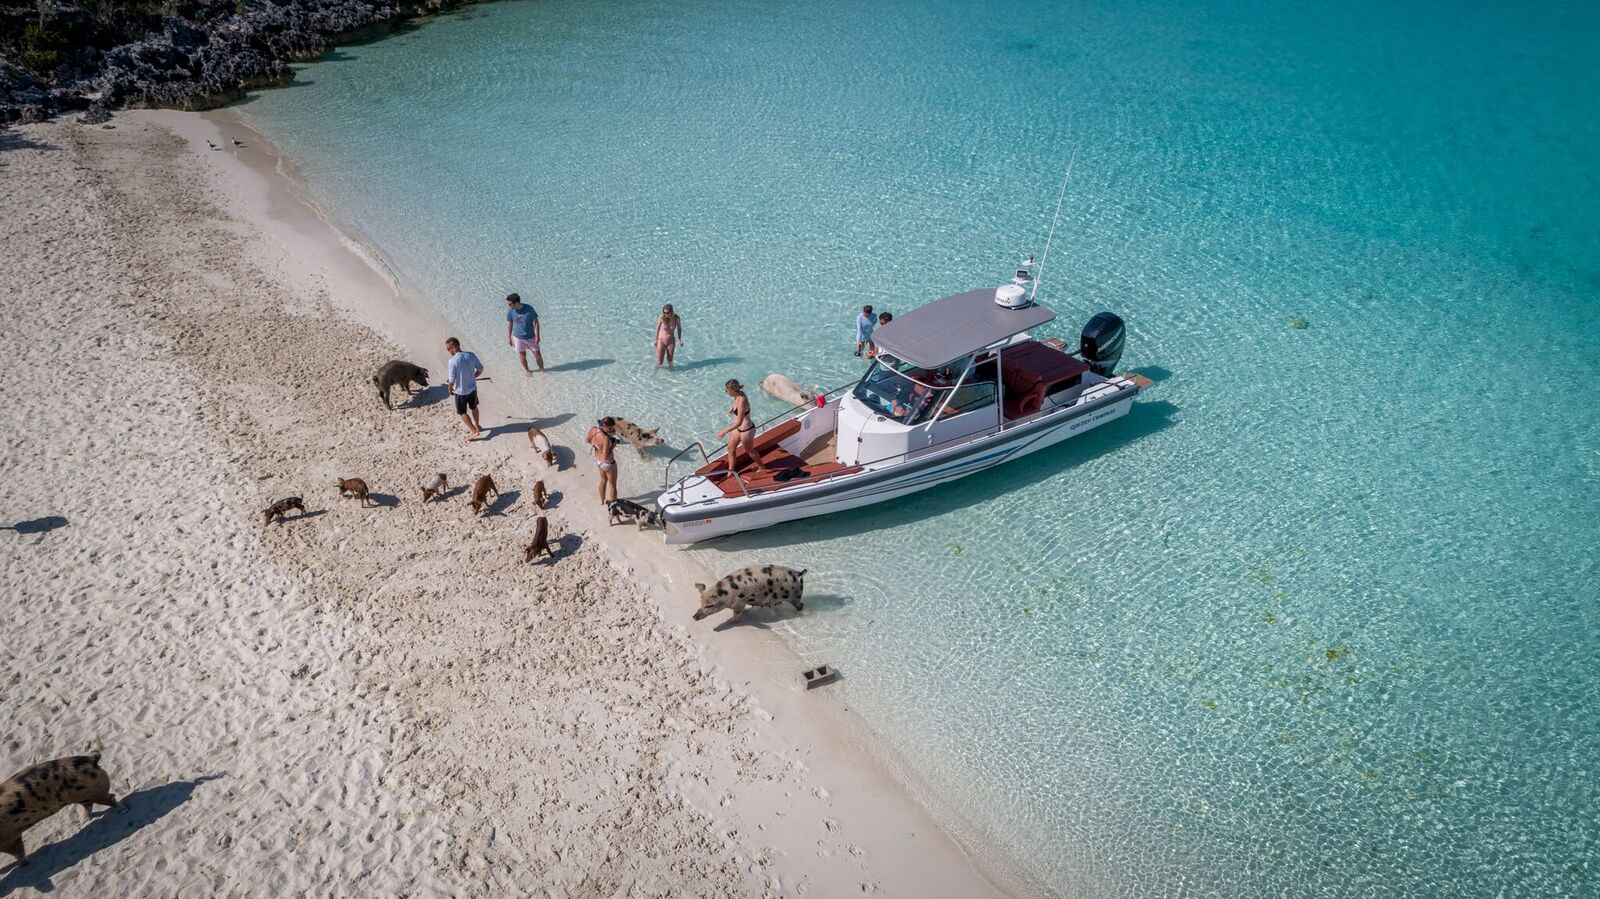 Blue Gryphon Yacht Charter Experience - Swimming With Pigs In The Bahamas